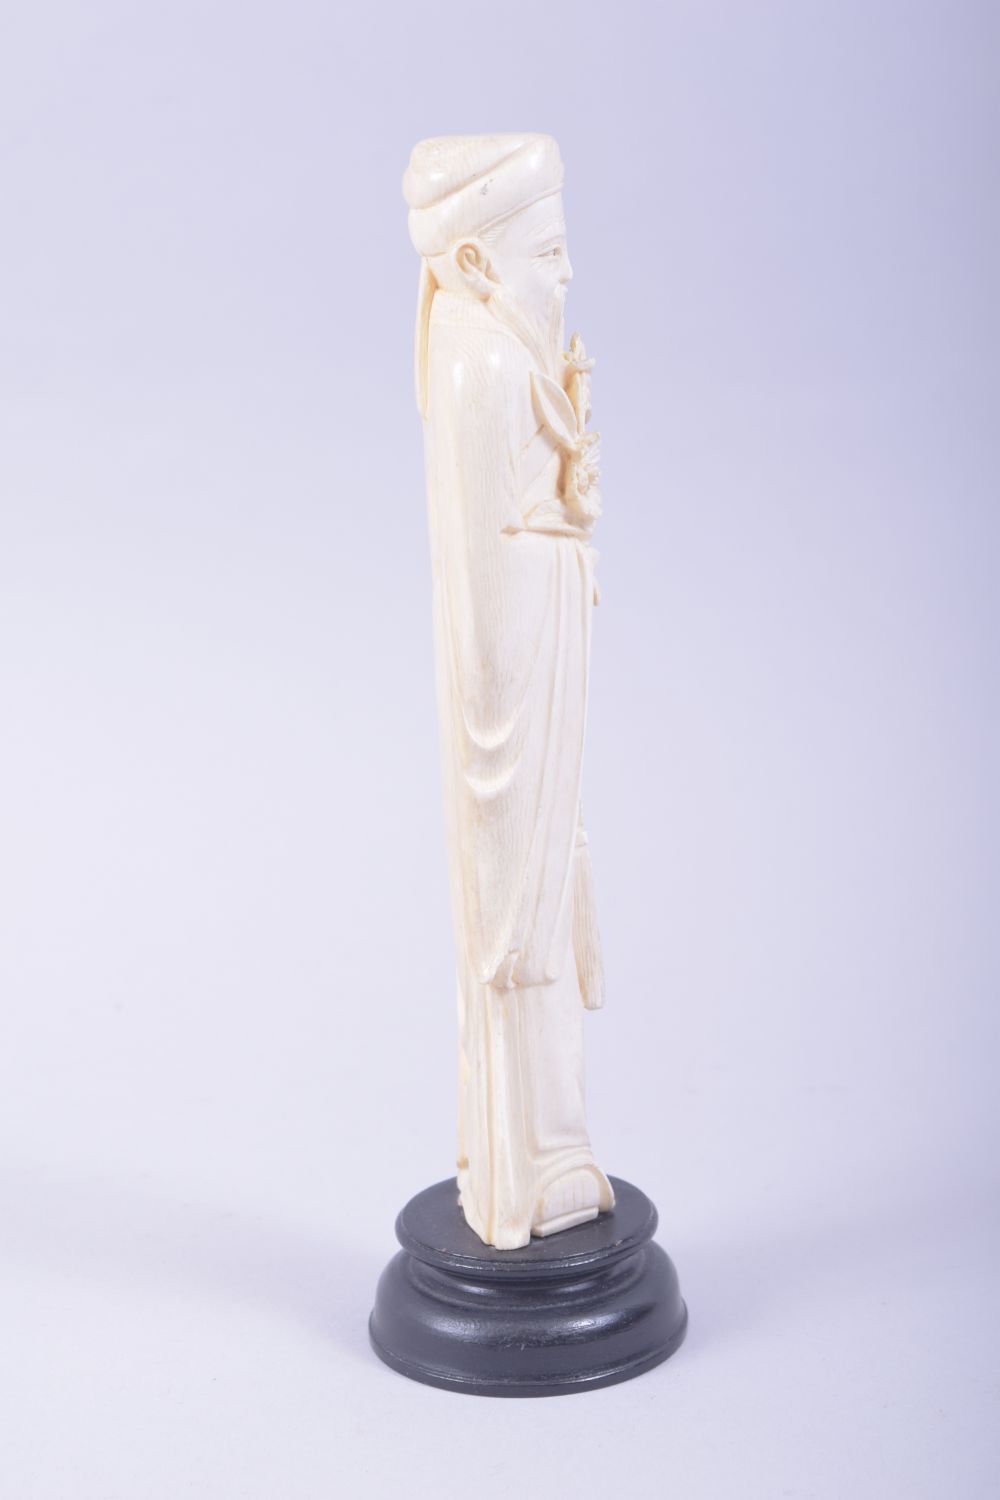 A CHINESE CARVED IVORY FIGURE OF A SAGE holding a flower, mounted to a hardwood base, 23cm high. - Image 2 of 7